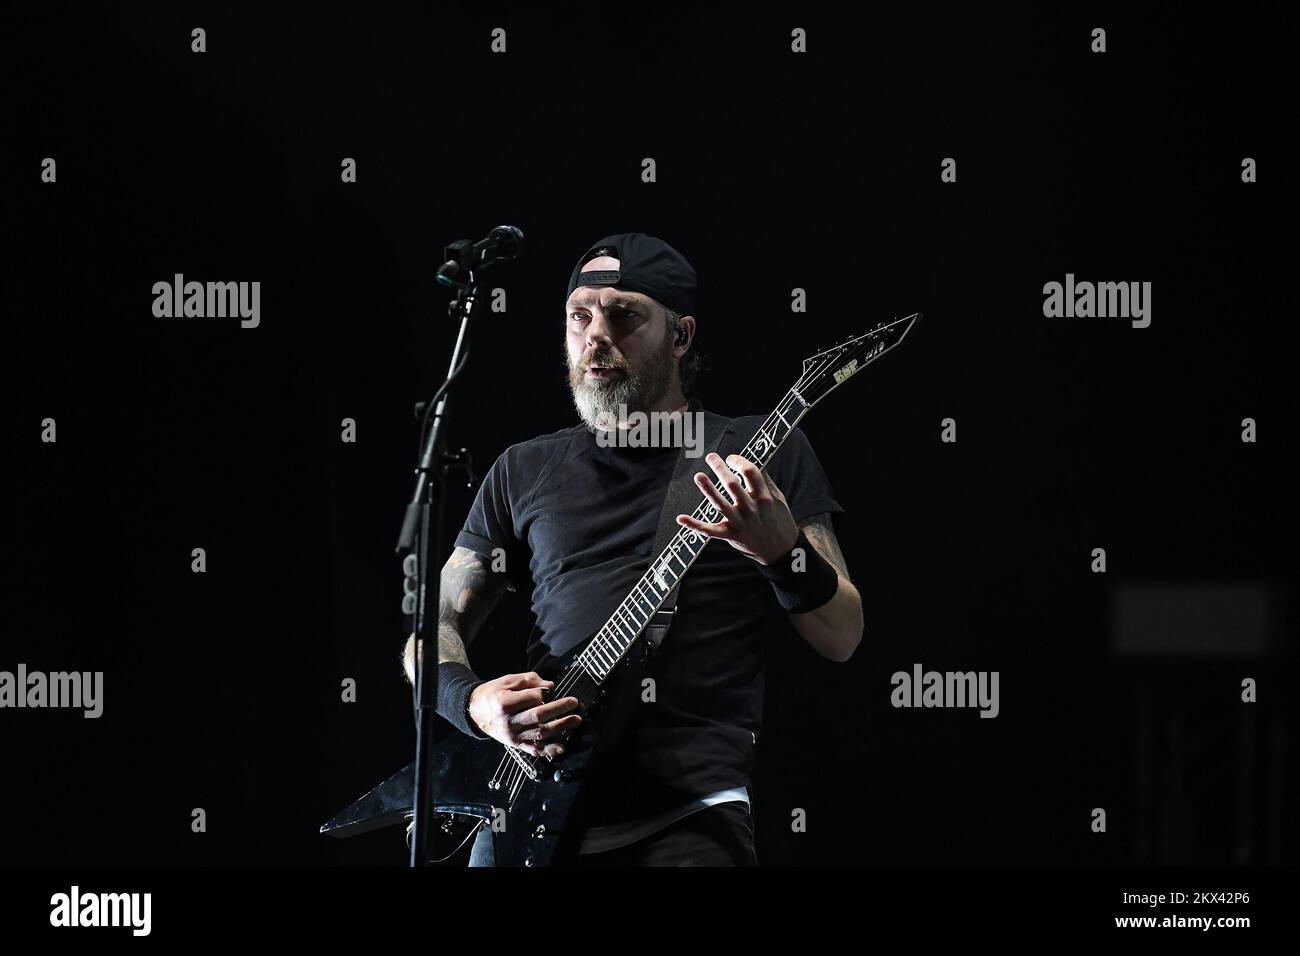 Rio de Janeiro, September 2, 2022. Guitarist Michael Paget of heavy metal band Bullet for my Valentine, during a concert at Rock in Rio 2022, in the c Stock Photo